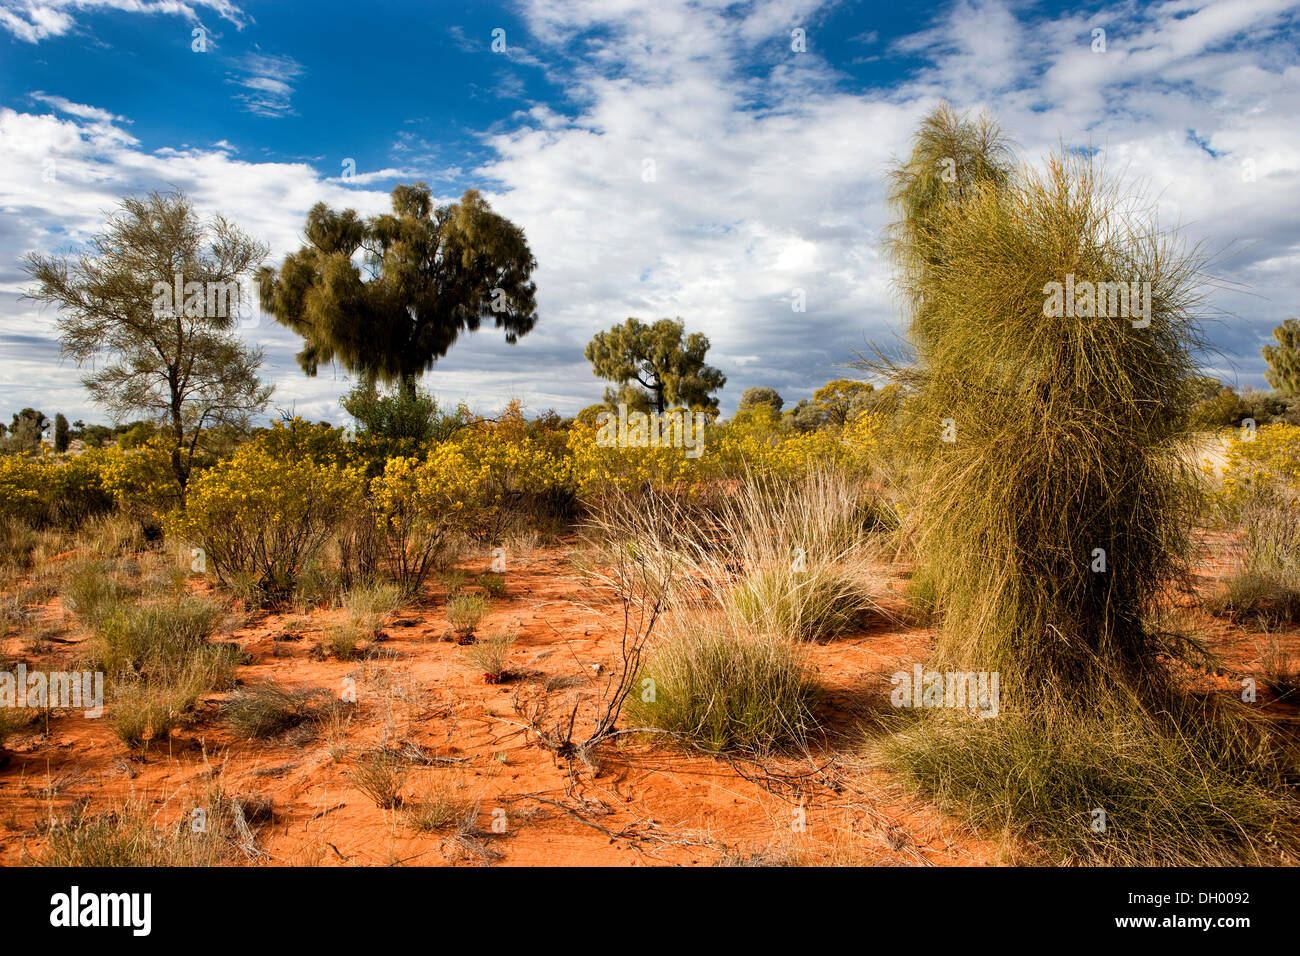 Vegetation in the outback, Northern Territory, Australia Stock Photo